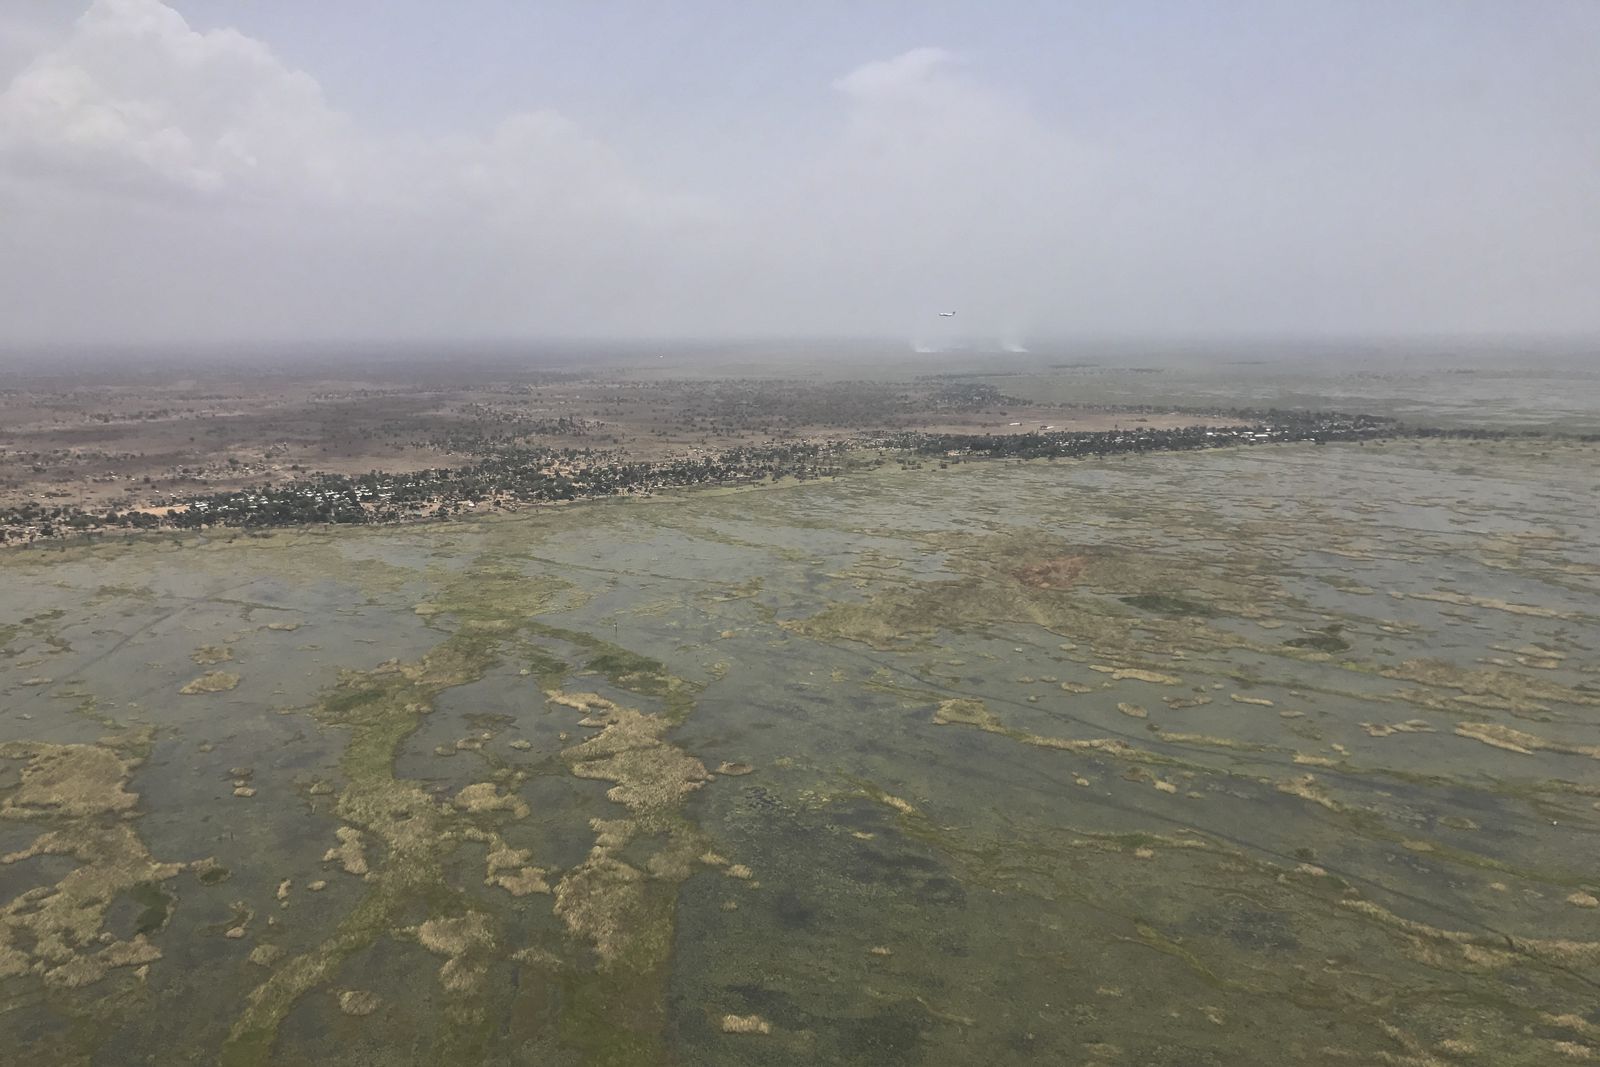 A helicopter view of the swamps in central South Sudan where people hide from government “counterinsurgency” raids. Image by Jane Ferguson. South Sudan, 2017.